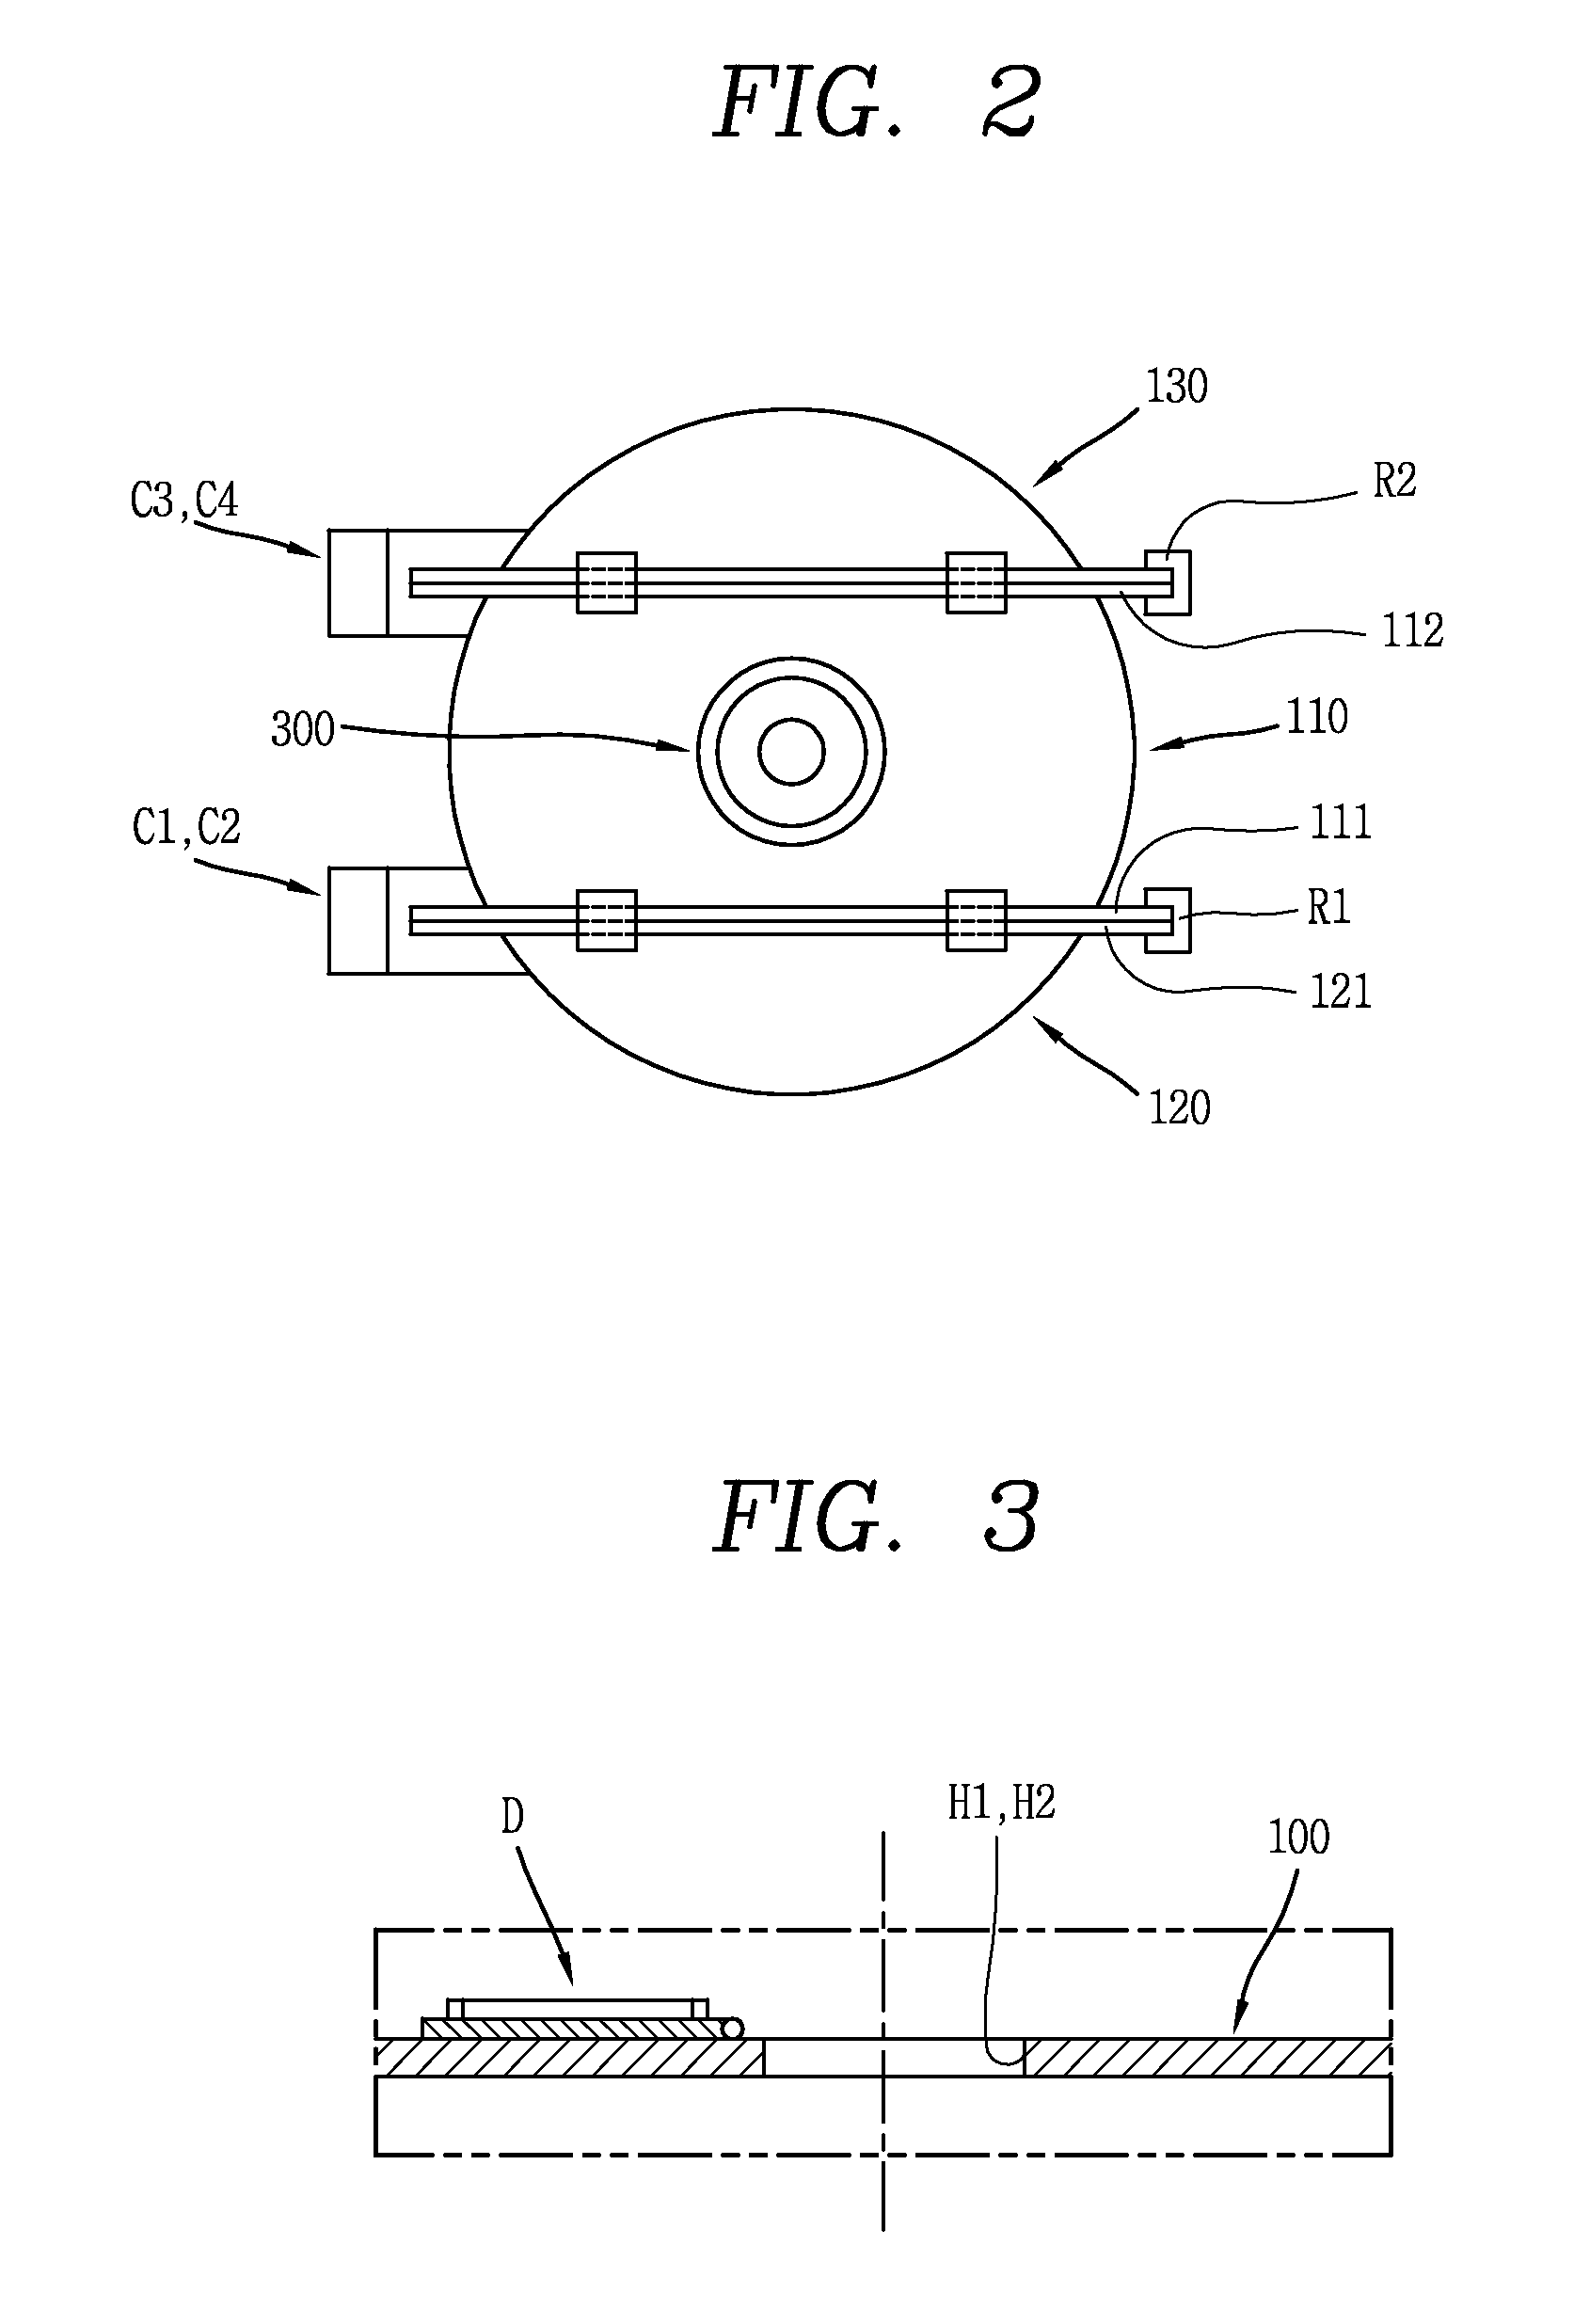 Apparatus for densifying carbon/carbon composite material